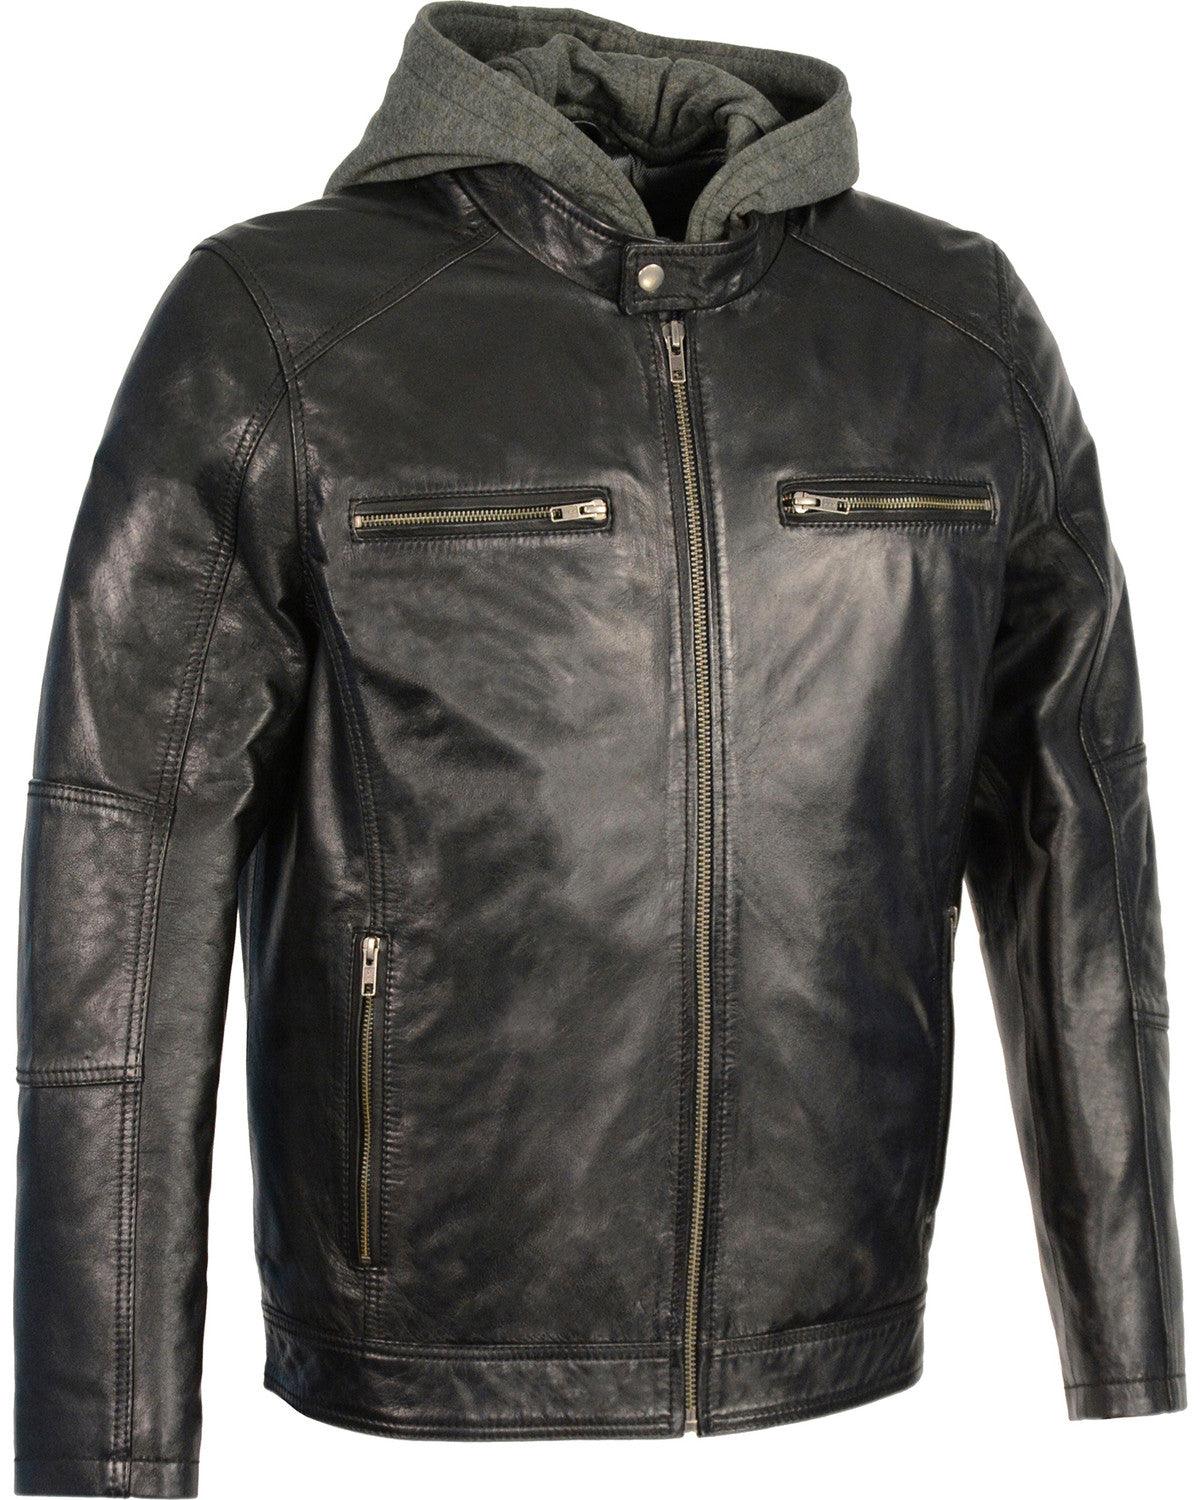 Men's Snap Collar Leather Moto Jacket w/ Removable Hood - Leather Loom